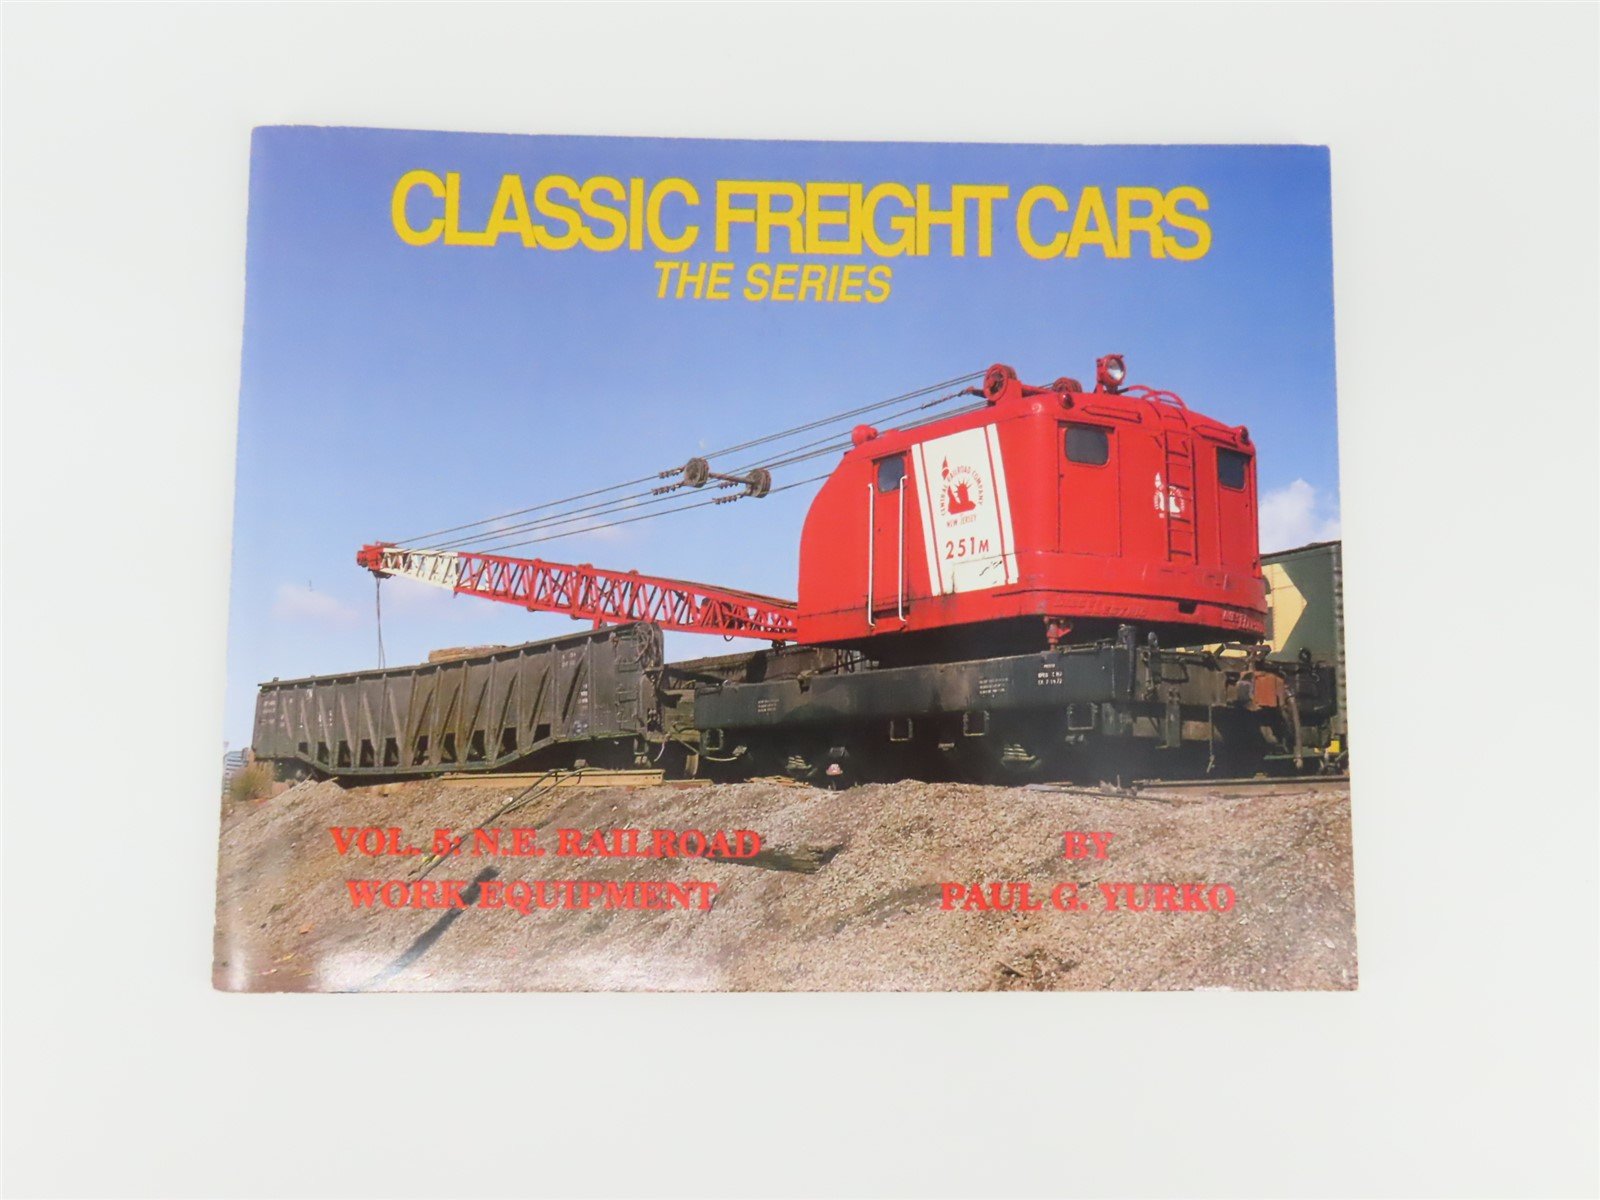 Classic Freight Cars -The Series- Volume 5 by Paul G. Yurko ©1994 SC Book